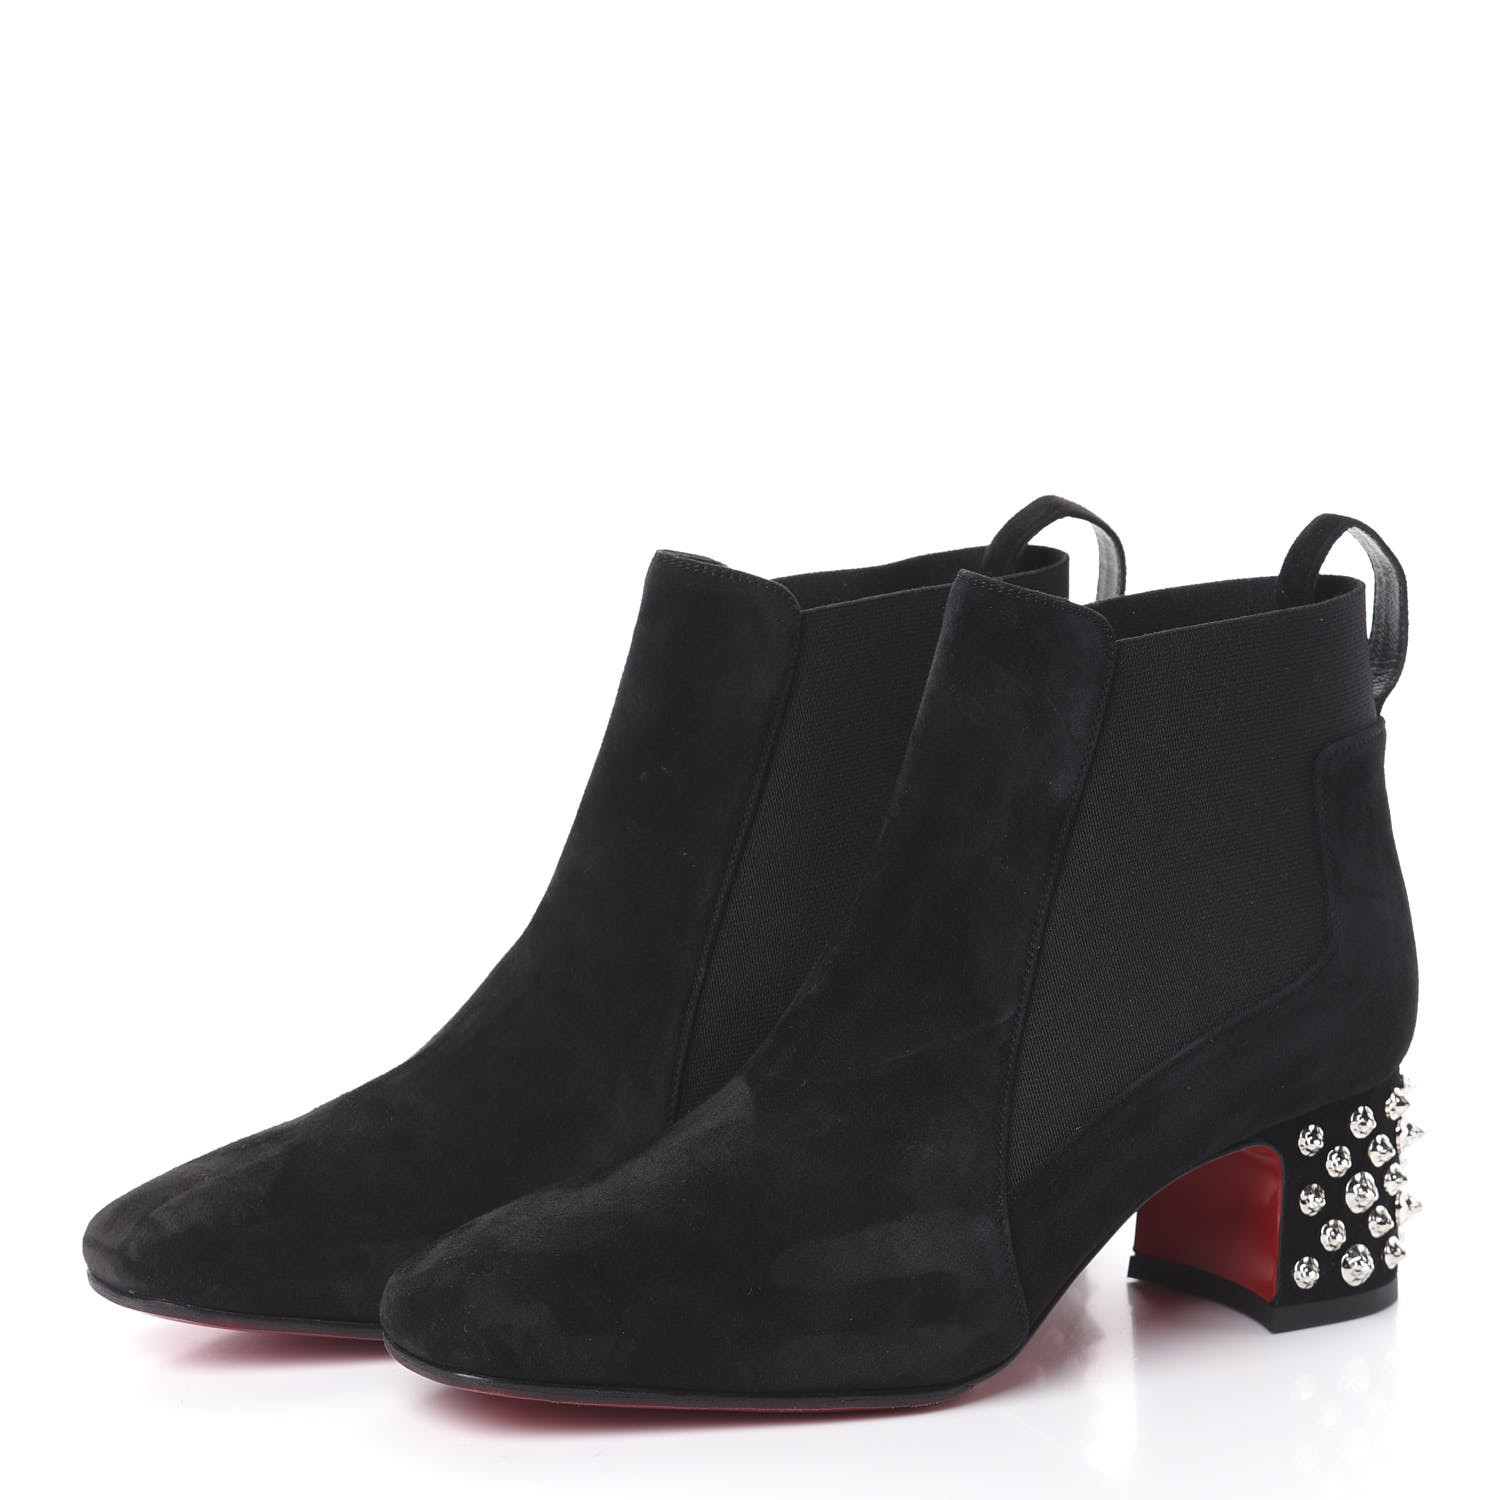 CHRISTIAN LOUBOUTIN Veau Velours Spiked Study Stretch 55 Ankle Boots 36 ...